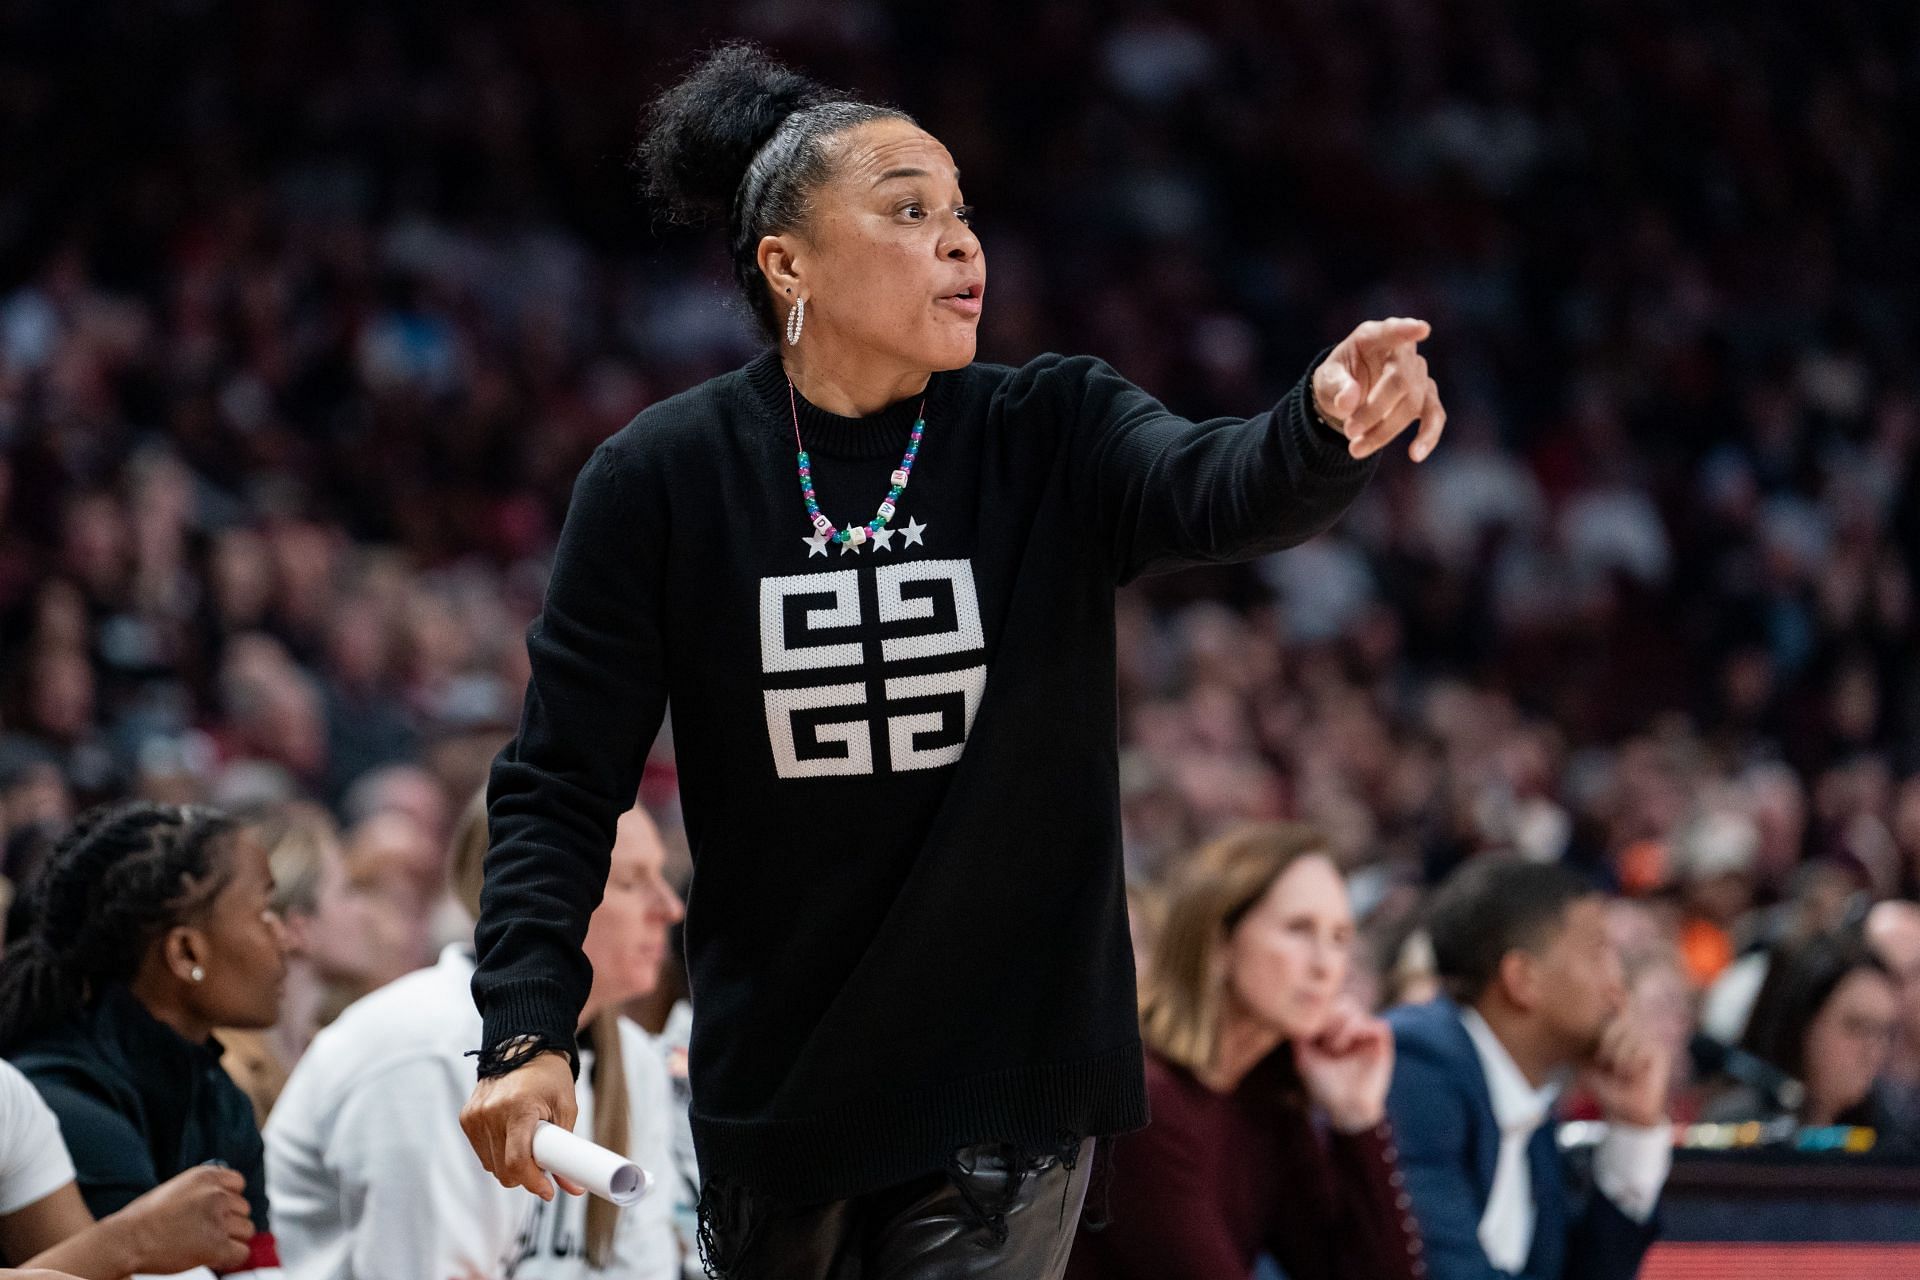 South Carolina coach Dawn Staley is attempting to capture her third NCAA championship.